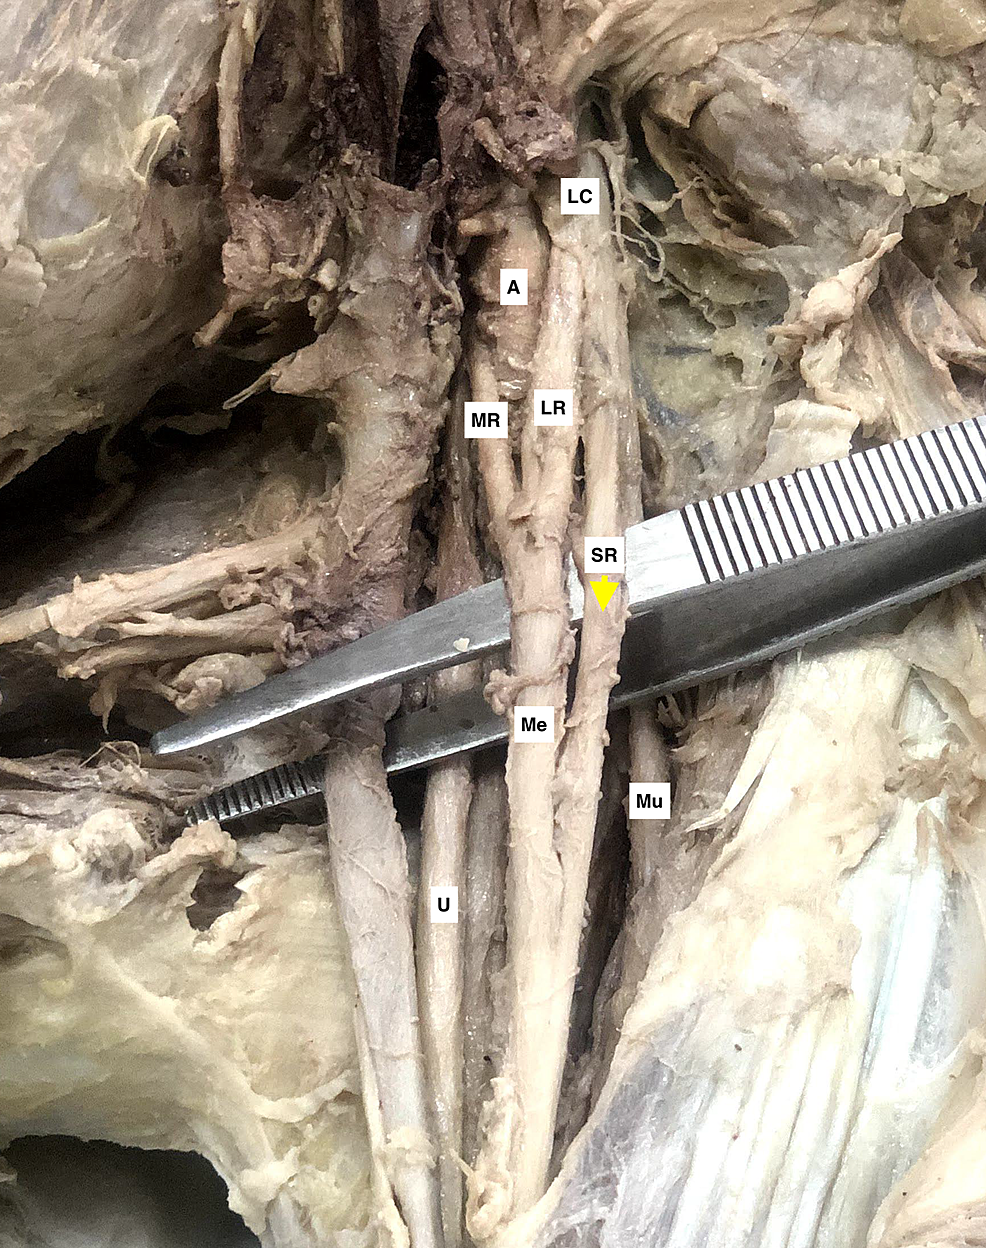 A-cadaveric-specimen-of-left-axilla-with-brachial-plexus-showing-a-thick-tubular-supernumerary-root-(SR,-yellow-arrowhead)-originating-from-the-lateral-aspect-of-the-lateral-cord-(LC)-and-blending-distally-with-the-median-nerve-(M)-after-its-formation.-The-axillary-artery-(A),-lateral-root-(LR),-and-medial-root-(MR)-of-the-median-nerve-(M),-musculocutaneous-nerve-(Mu),-and-ulnar-nerve-(U)-can-be-seen-in-the-adjacent-region.